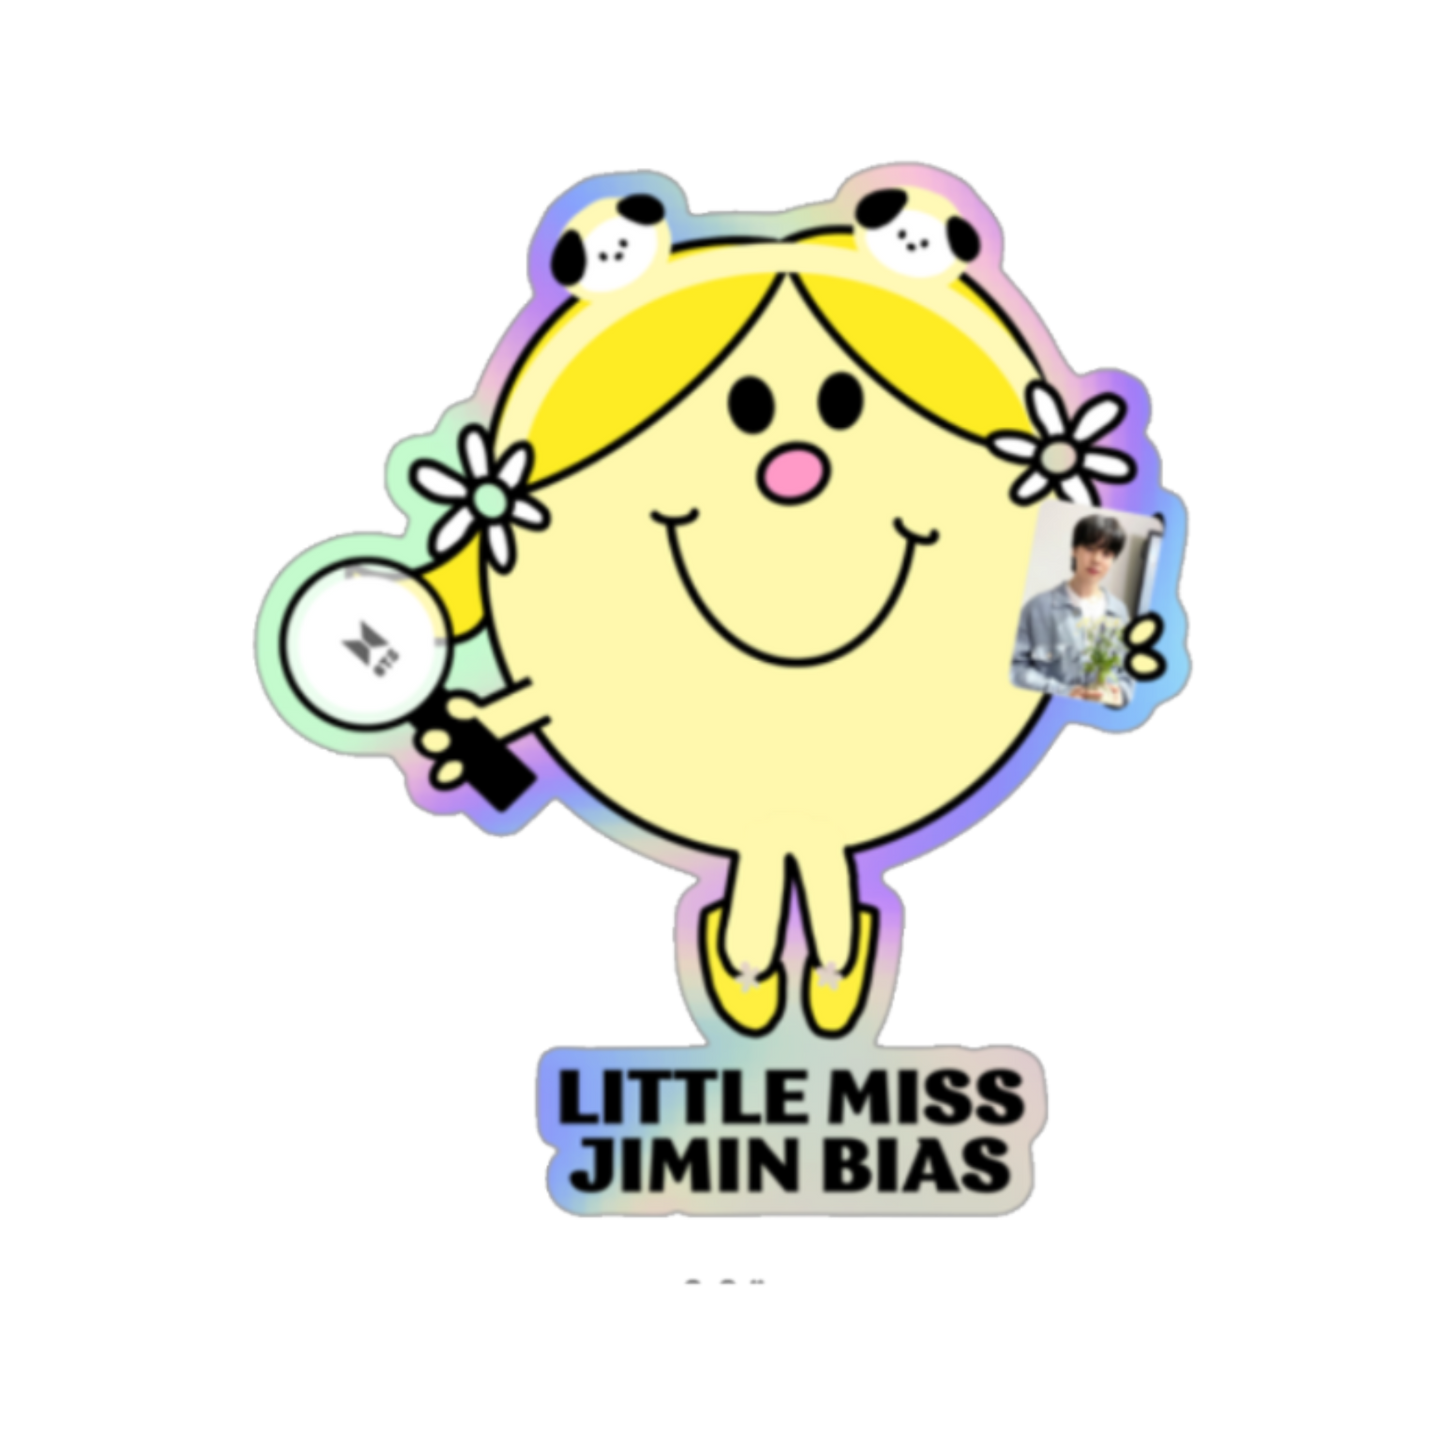 Little Miss Army Holographic Stickers